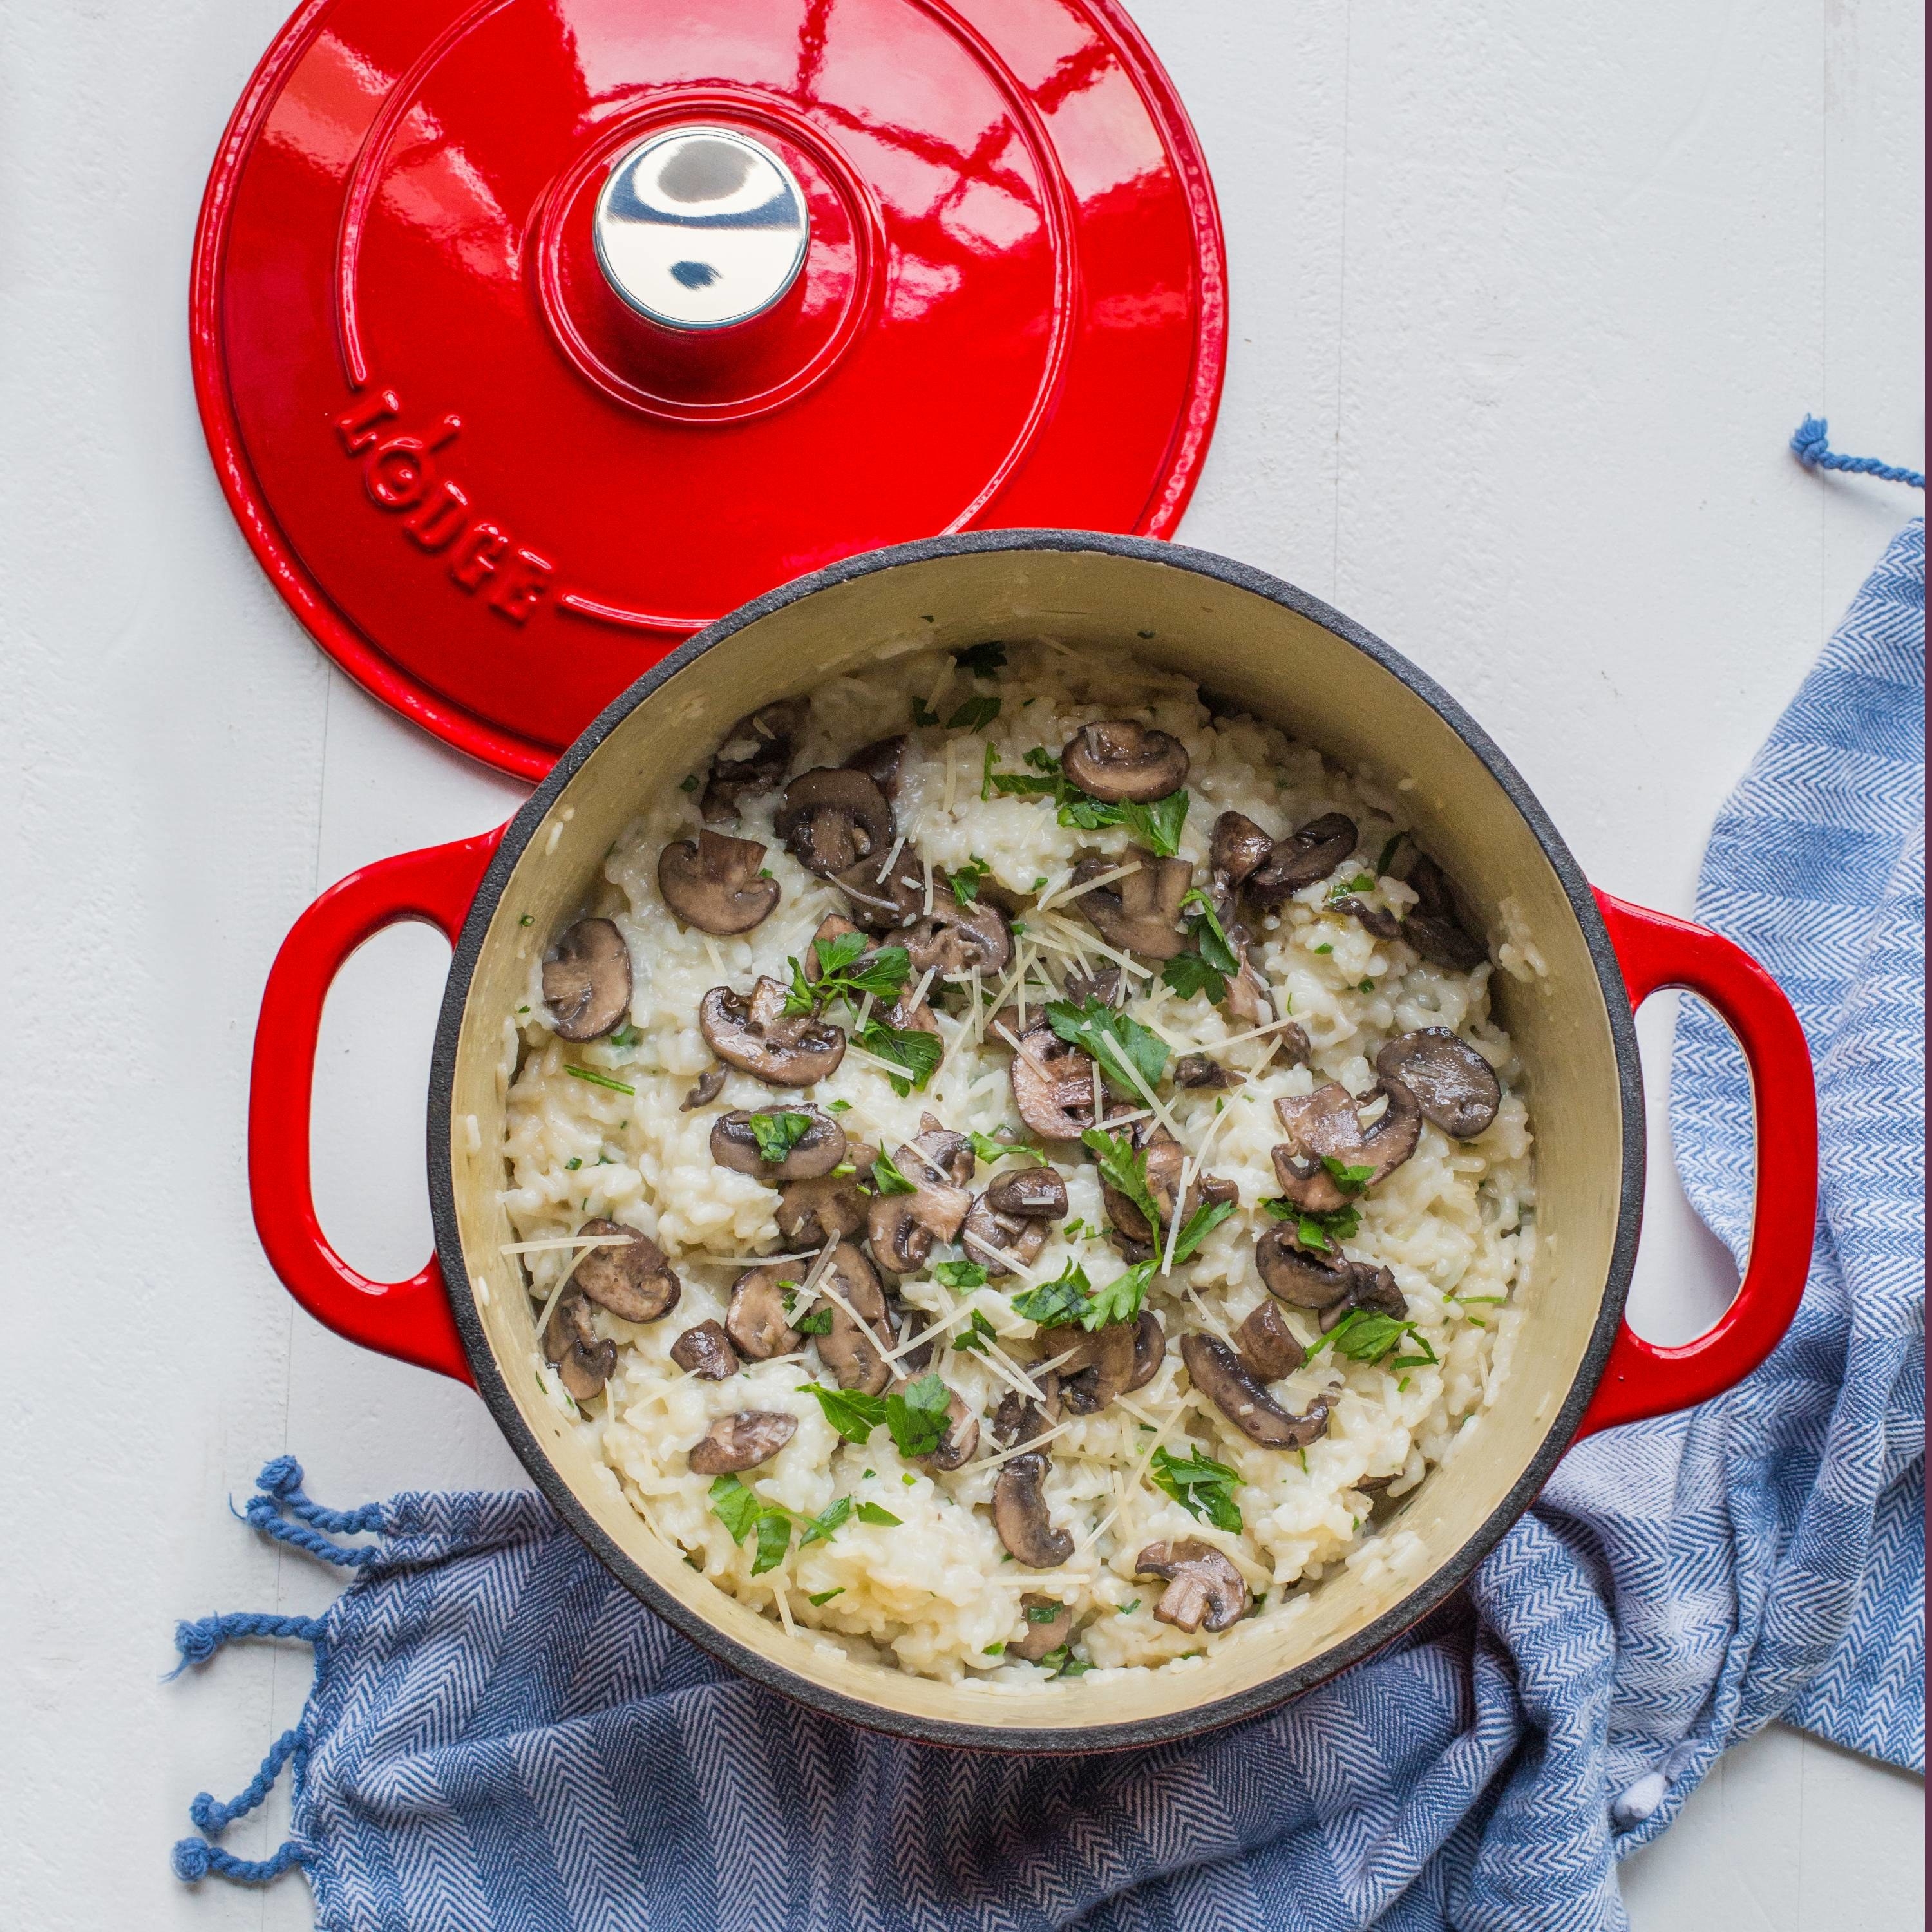 the dutch oven in red with a mushroom risotto inside